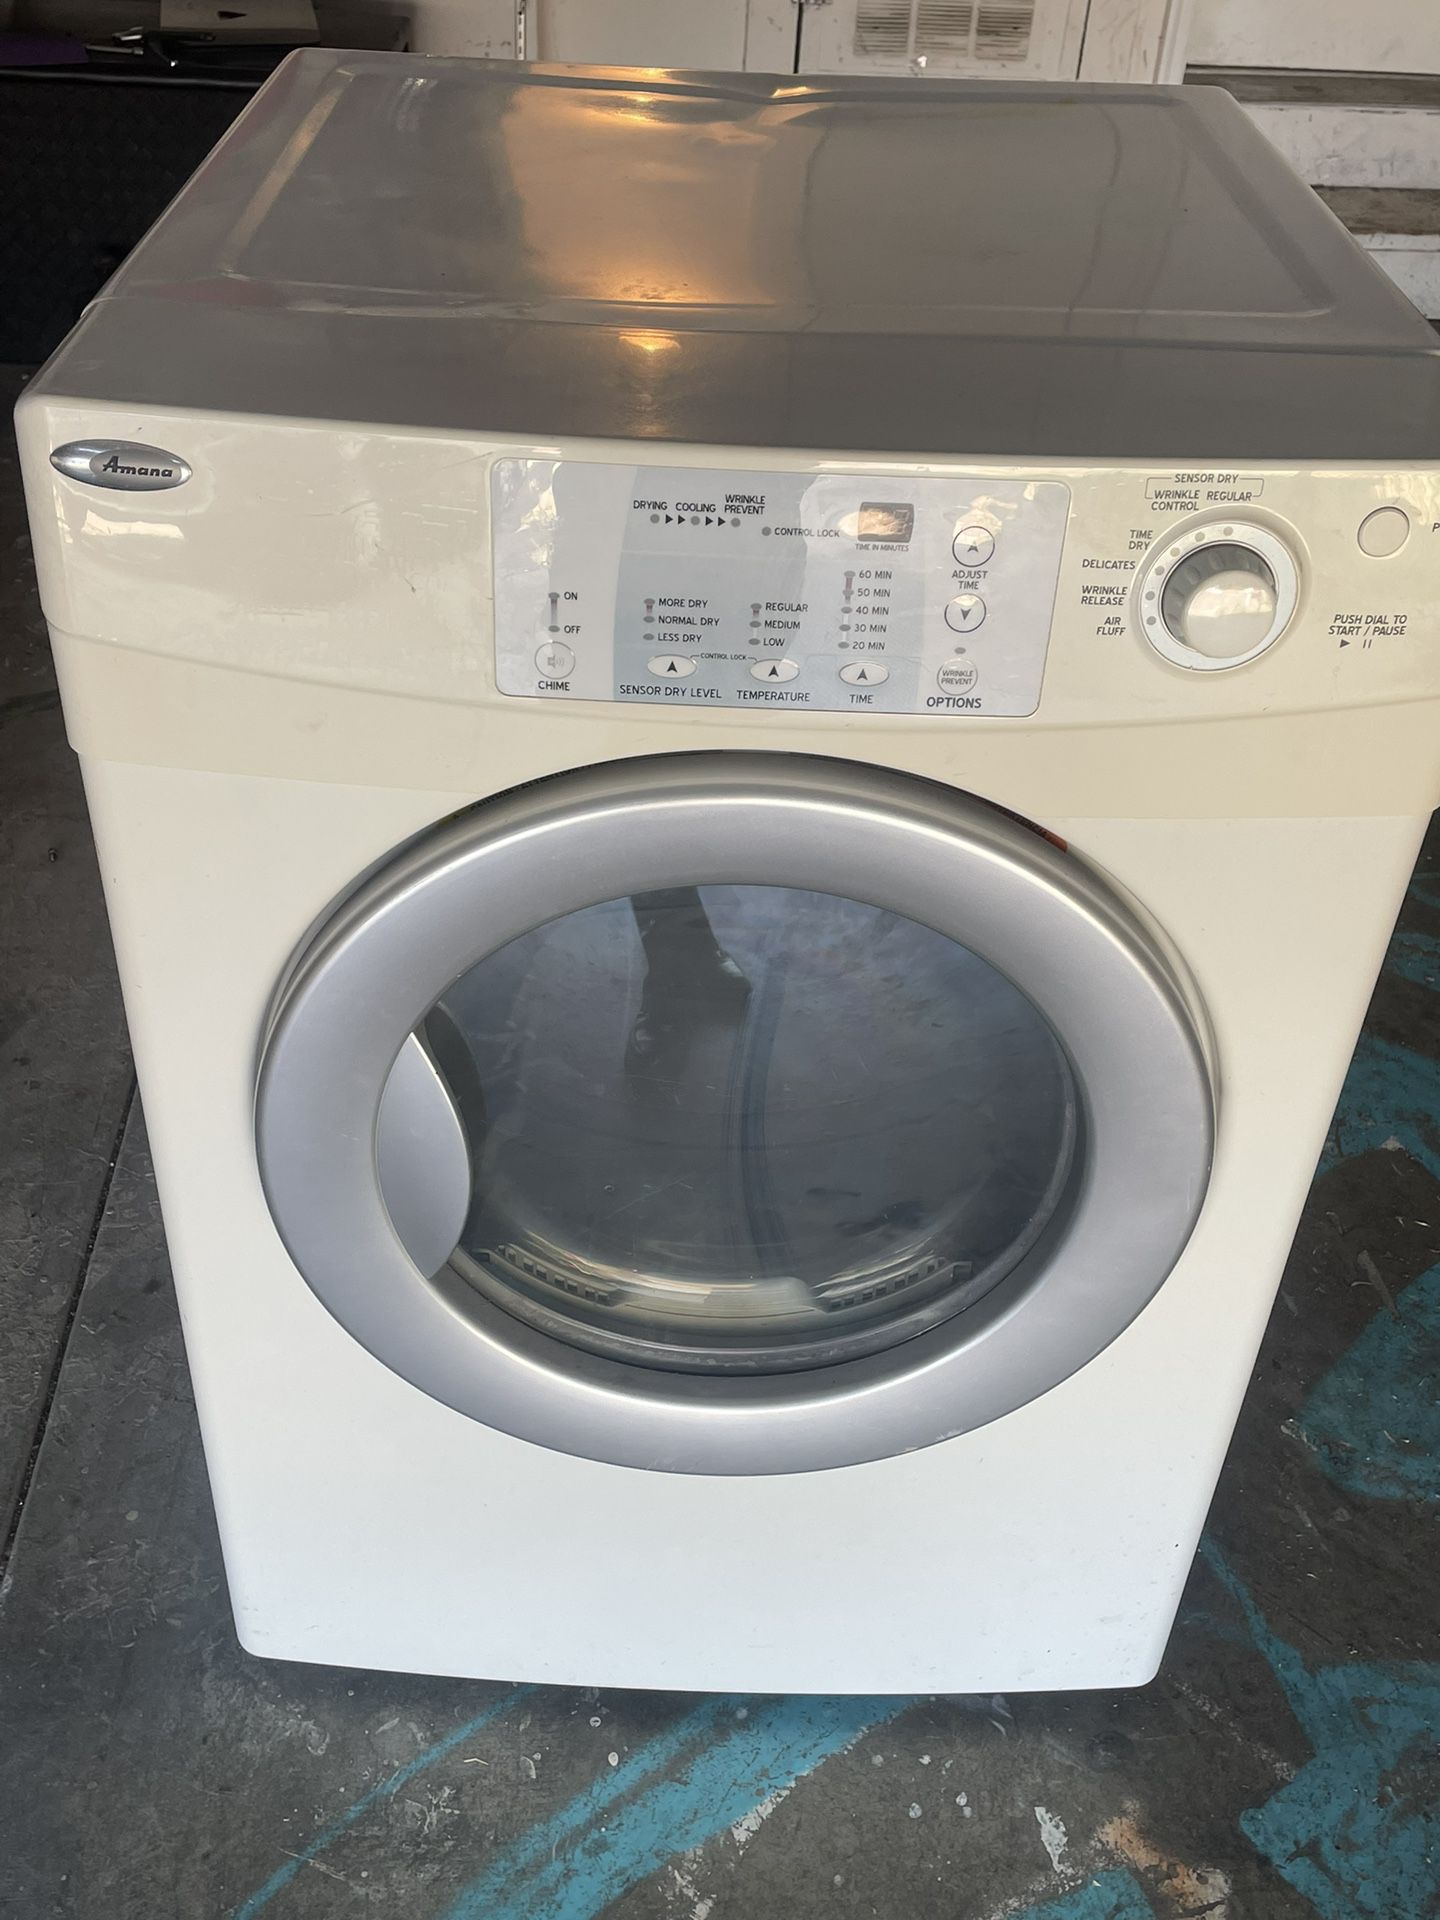 Dryer For Sale!!